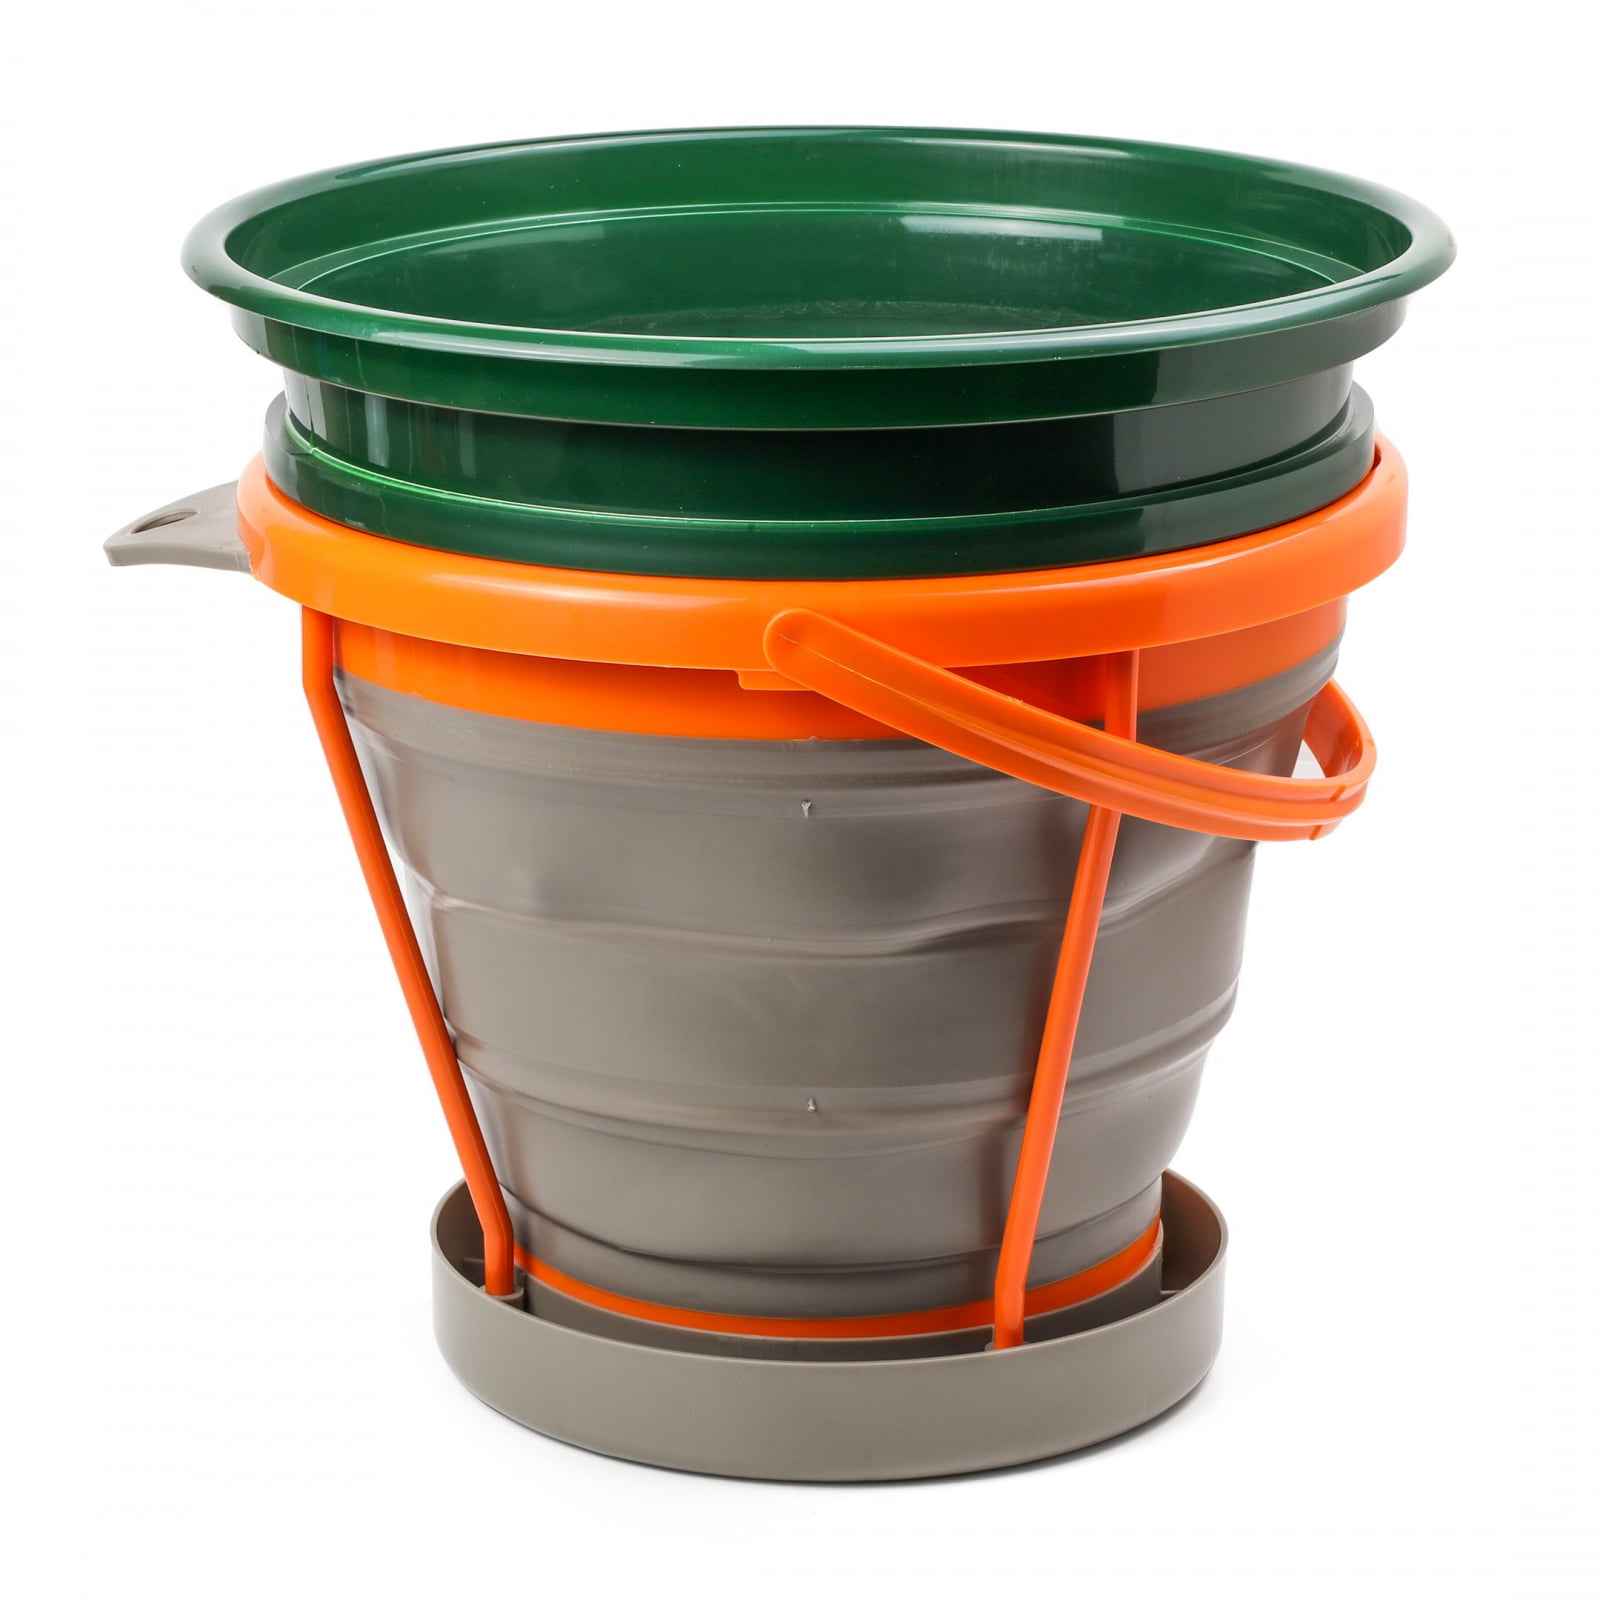 Collapsible Bucket With Handle - Brilliant Promos - Be Brilliant!